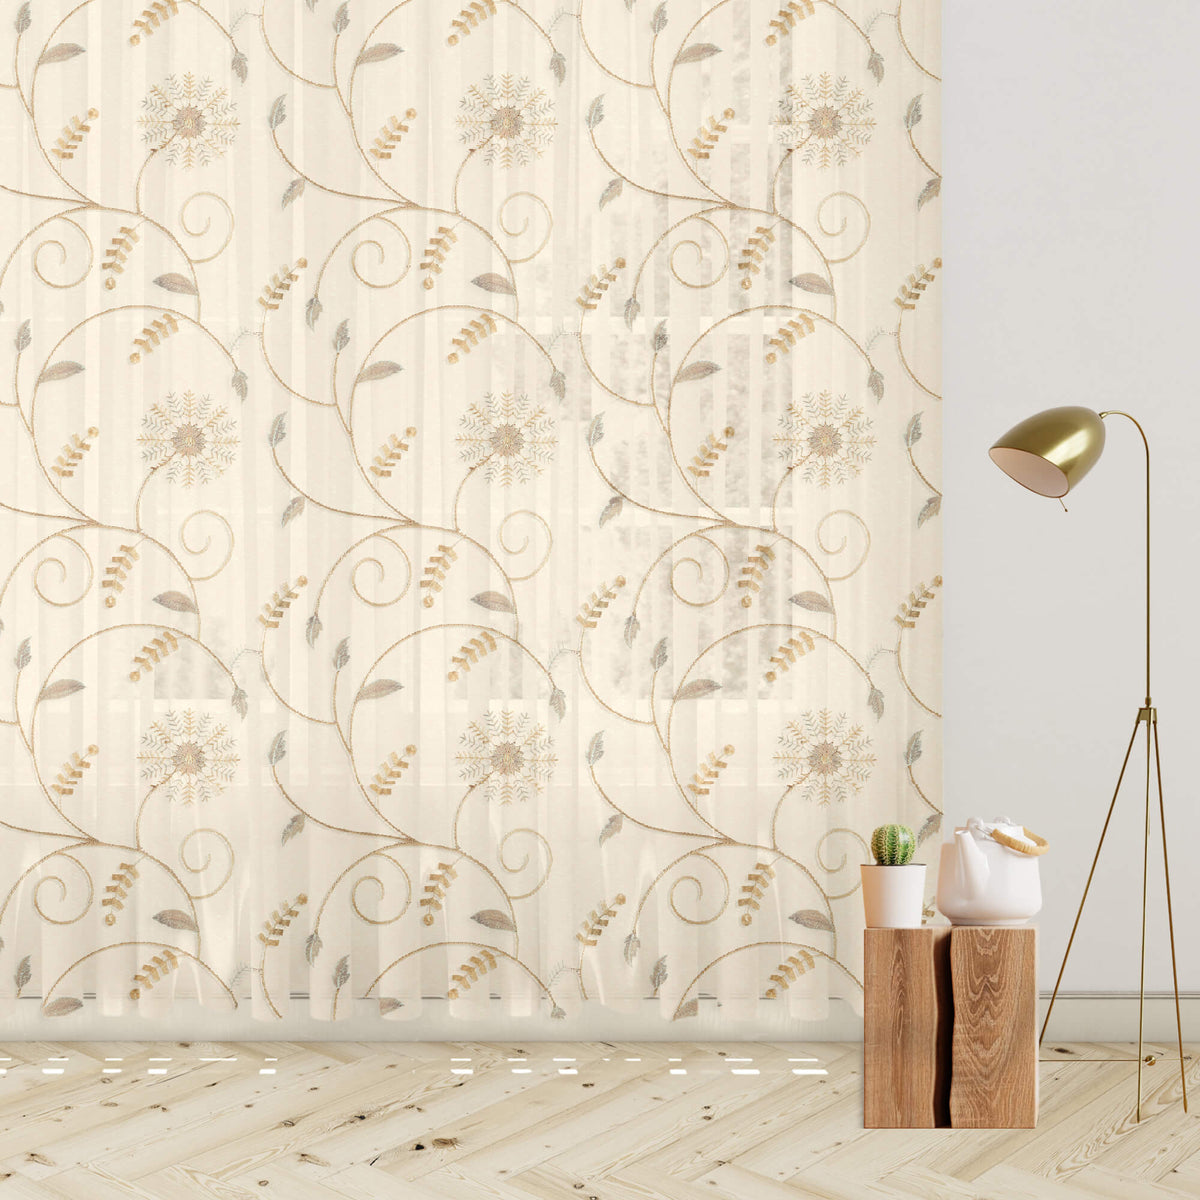 Oatmeal Beige And Tan Brown Floral Pattern Embroidery Organza Tissue Premium Sheer Fabric (Width 48 Inches)